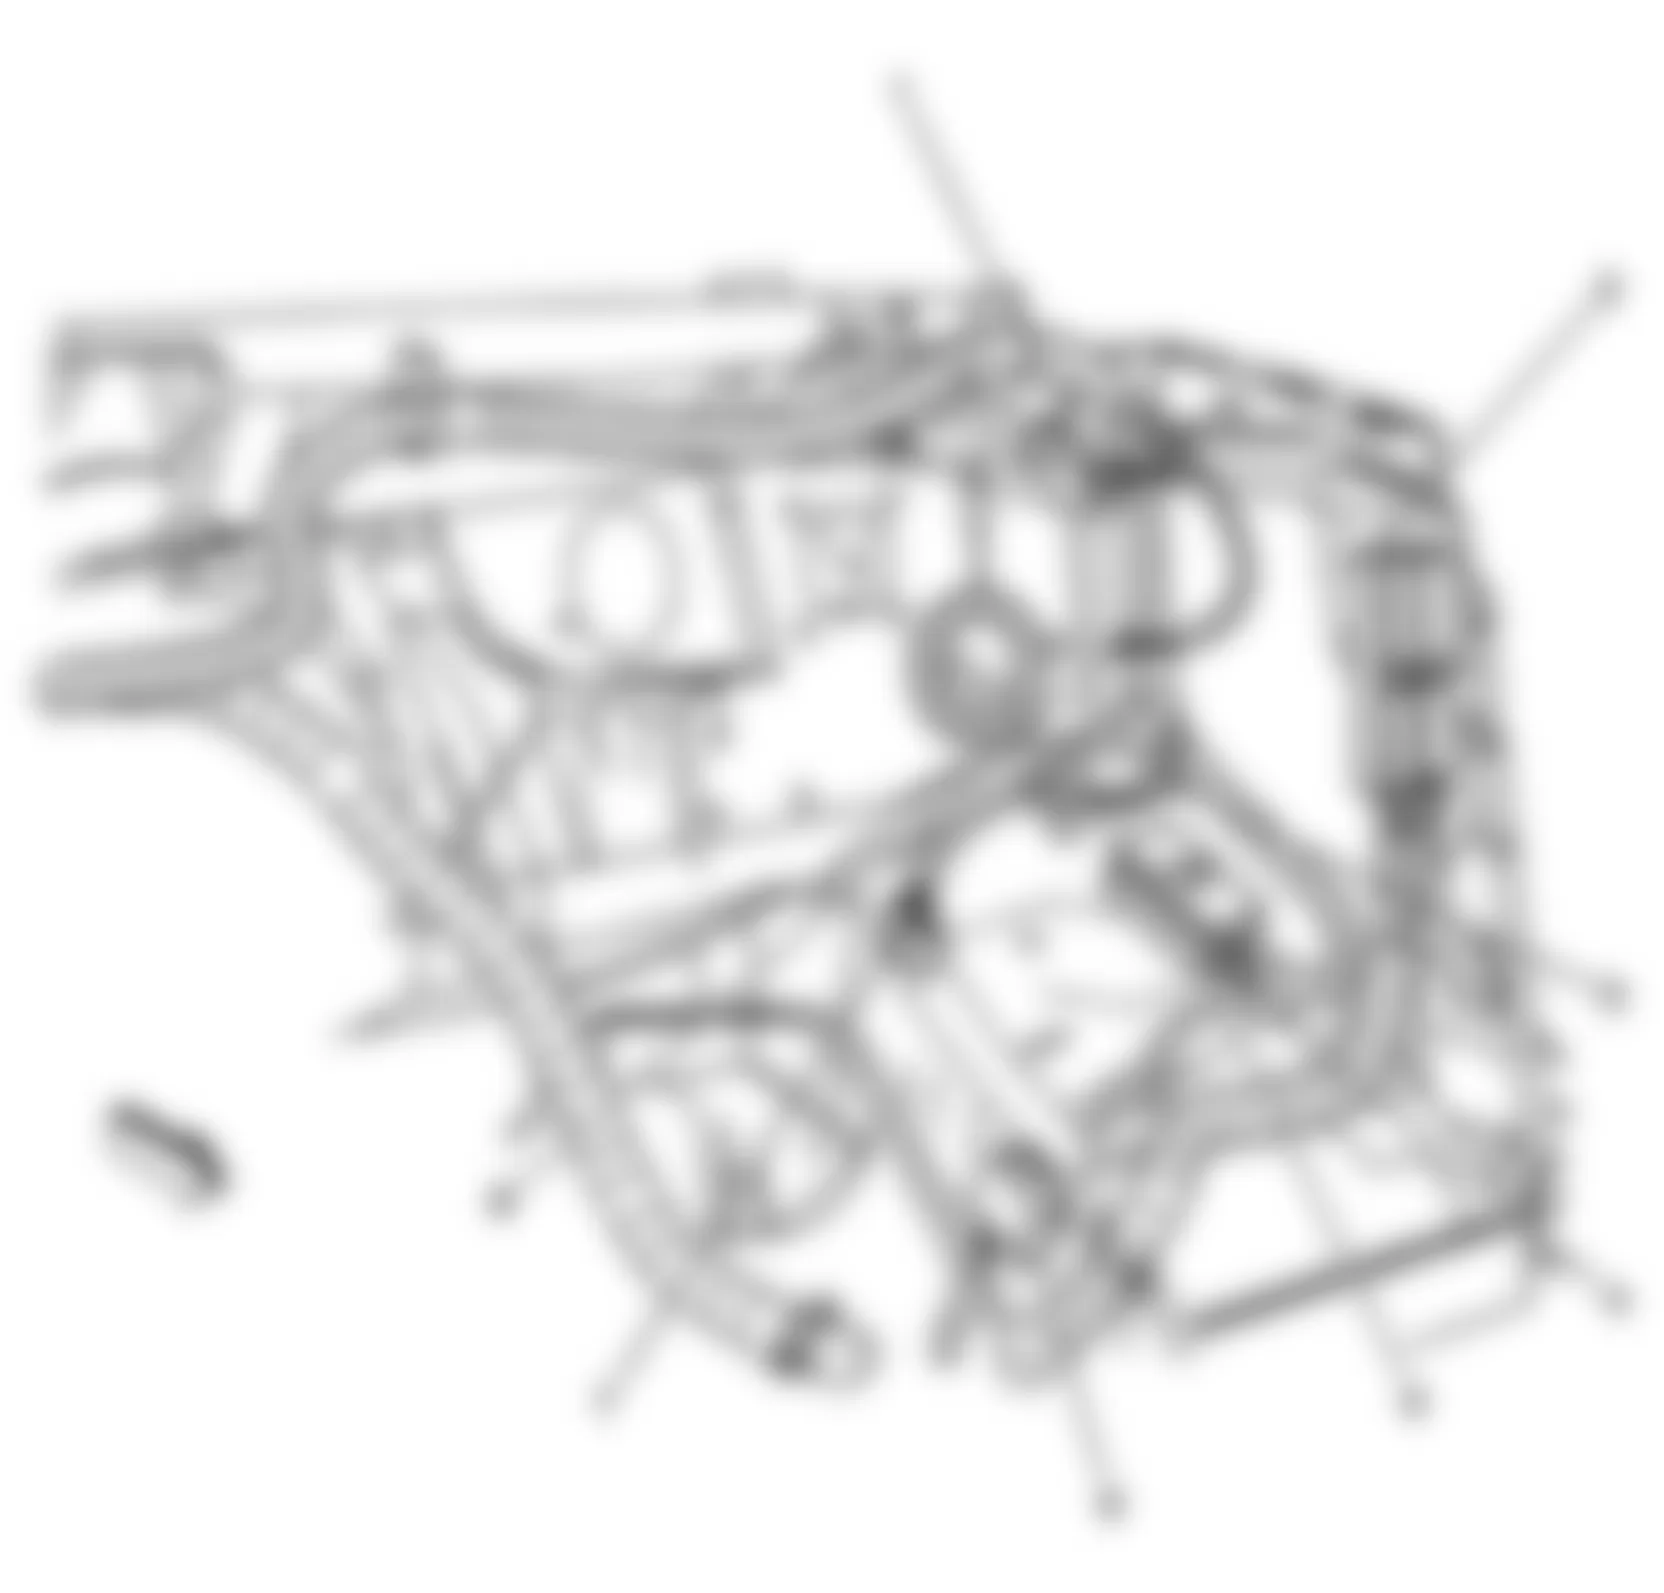 GMC Savana G2500 2009 - Component Locations -  Left Rear Of Engine Compartment